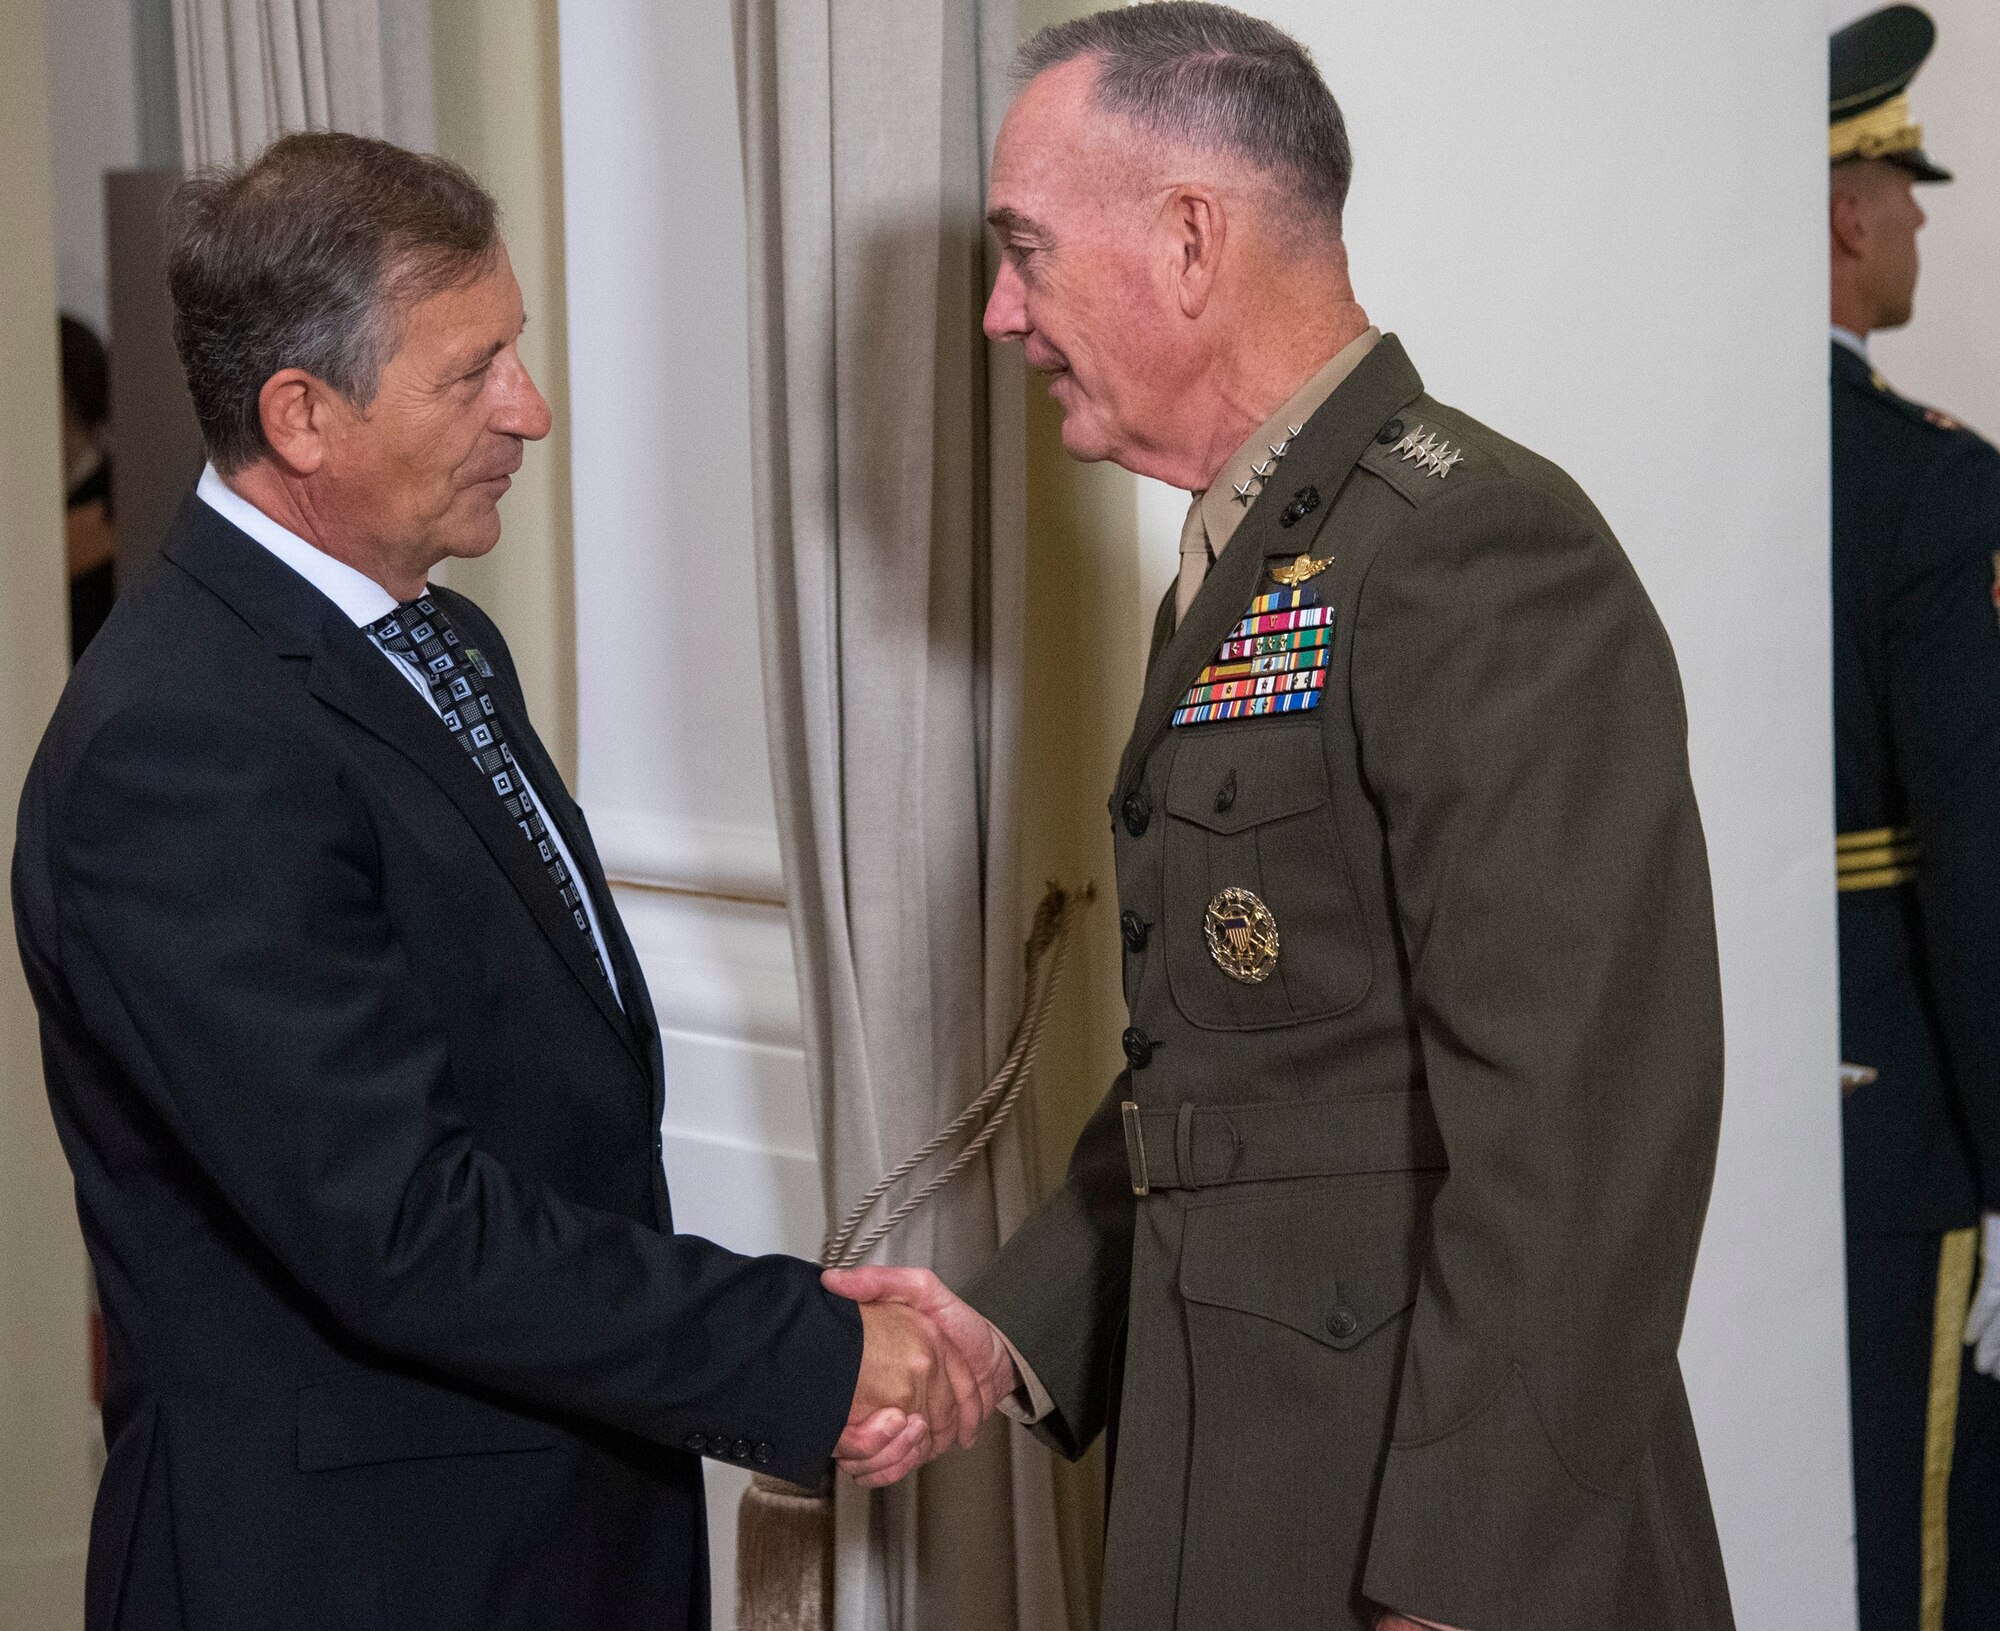 Marine Corps Gen. Joe Dunford, chairman of the Joint Chiefs of Staff, meets Karl Erjavec, the Slovenian minister of defense, during the opening ceremony of the North Atlantic Treaty Organization Military Committee Conference at the National Gallery in Ljubljana, Slovenia,  Sept. 13, 2019.